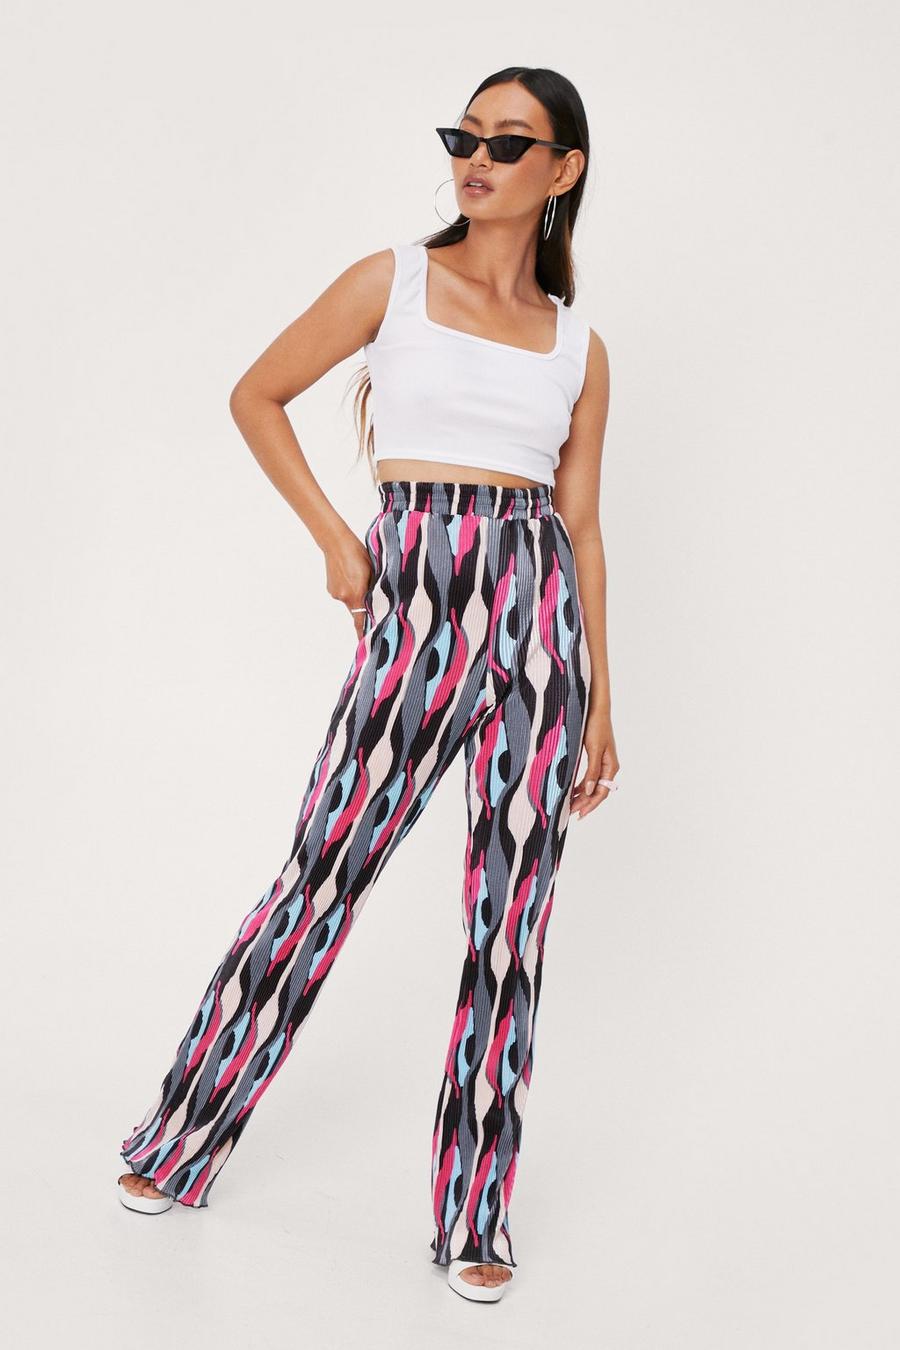 Petite Plisse Abstract Print Flares